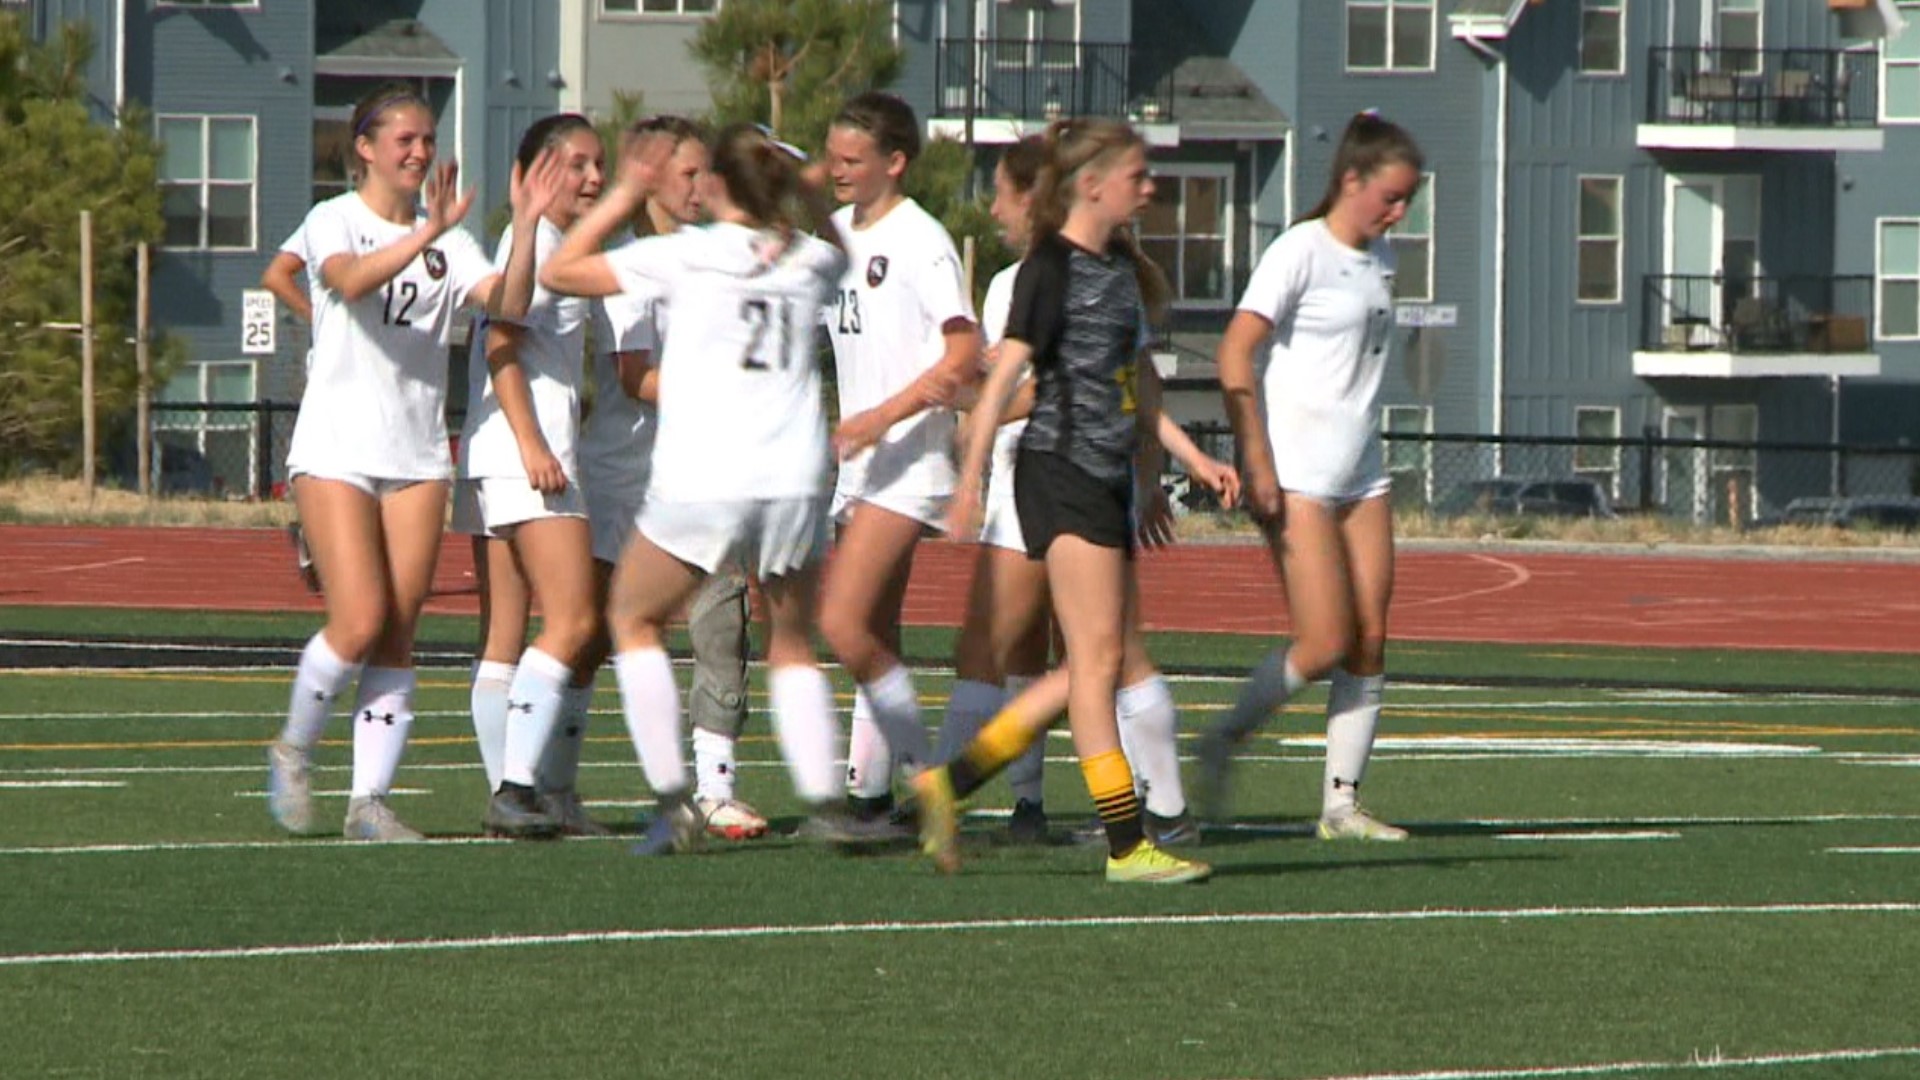 The Mustangs rallied from a halftime deficit to win 2-1 over the Miners on Tuesday.